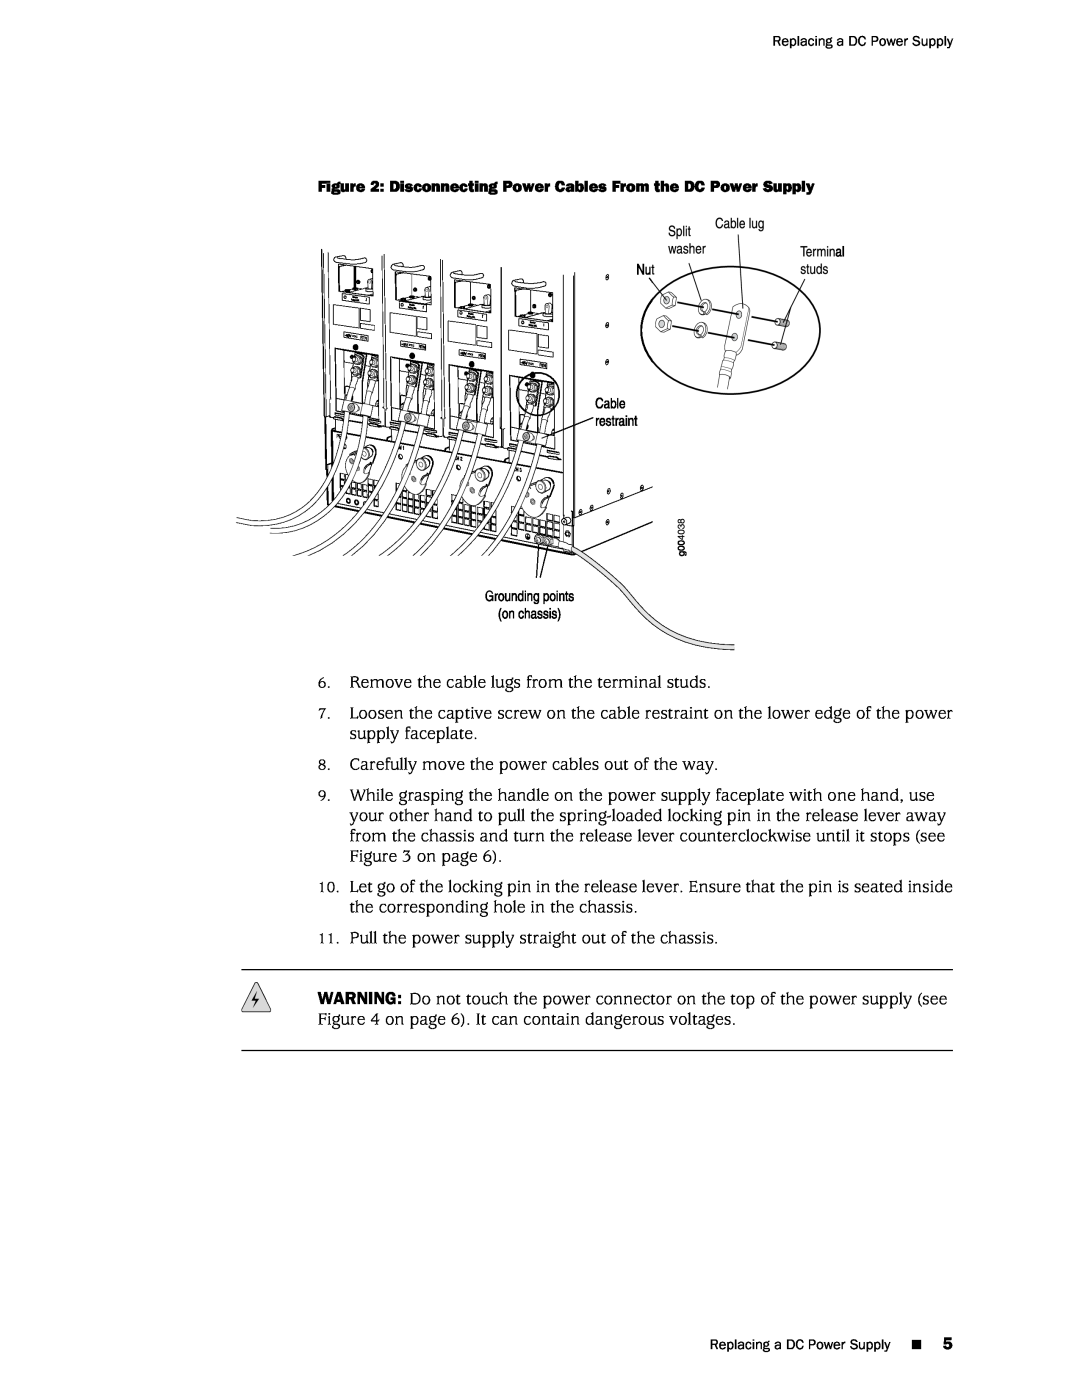 Juniper Networks MX960 installation instructions Remove the cable lugs from the terminal studs 